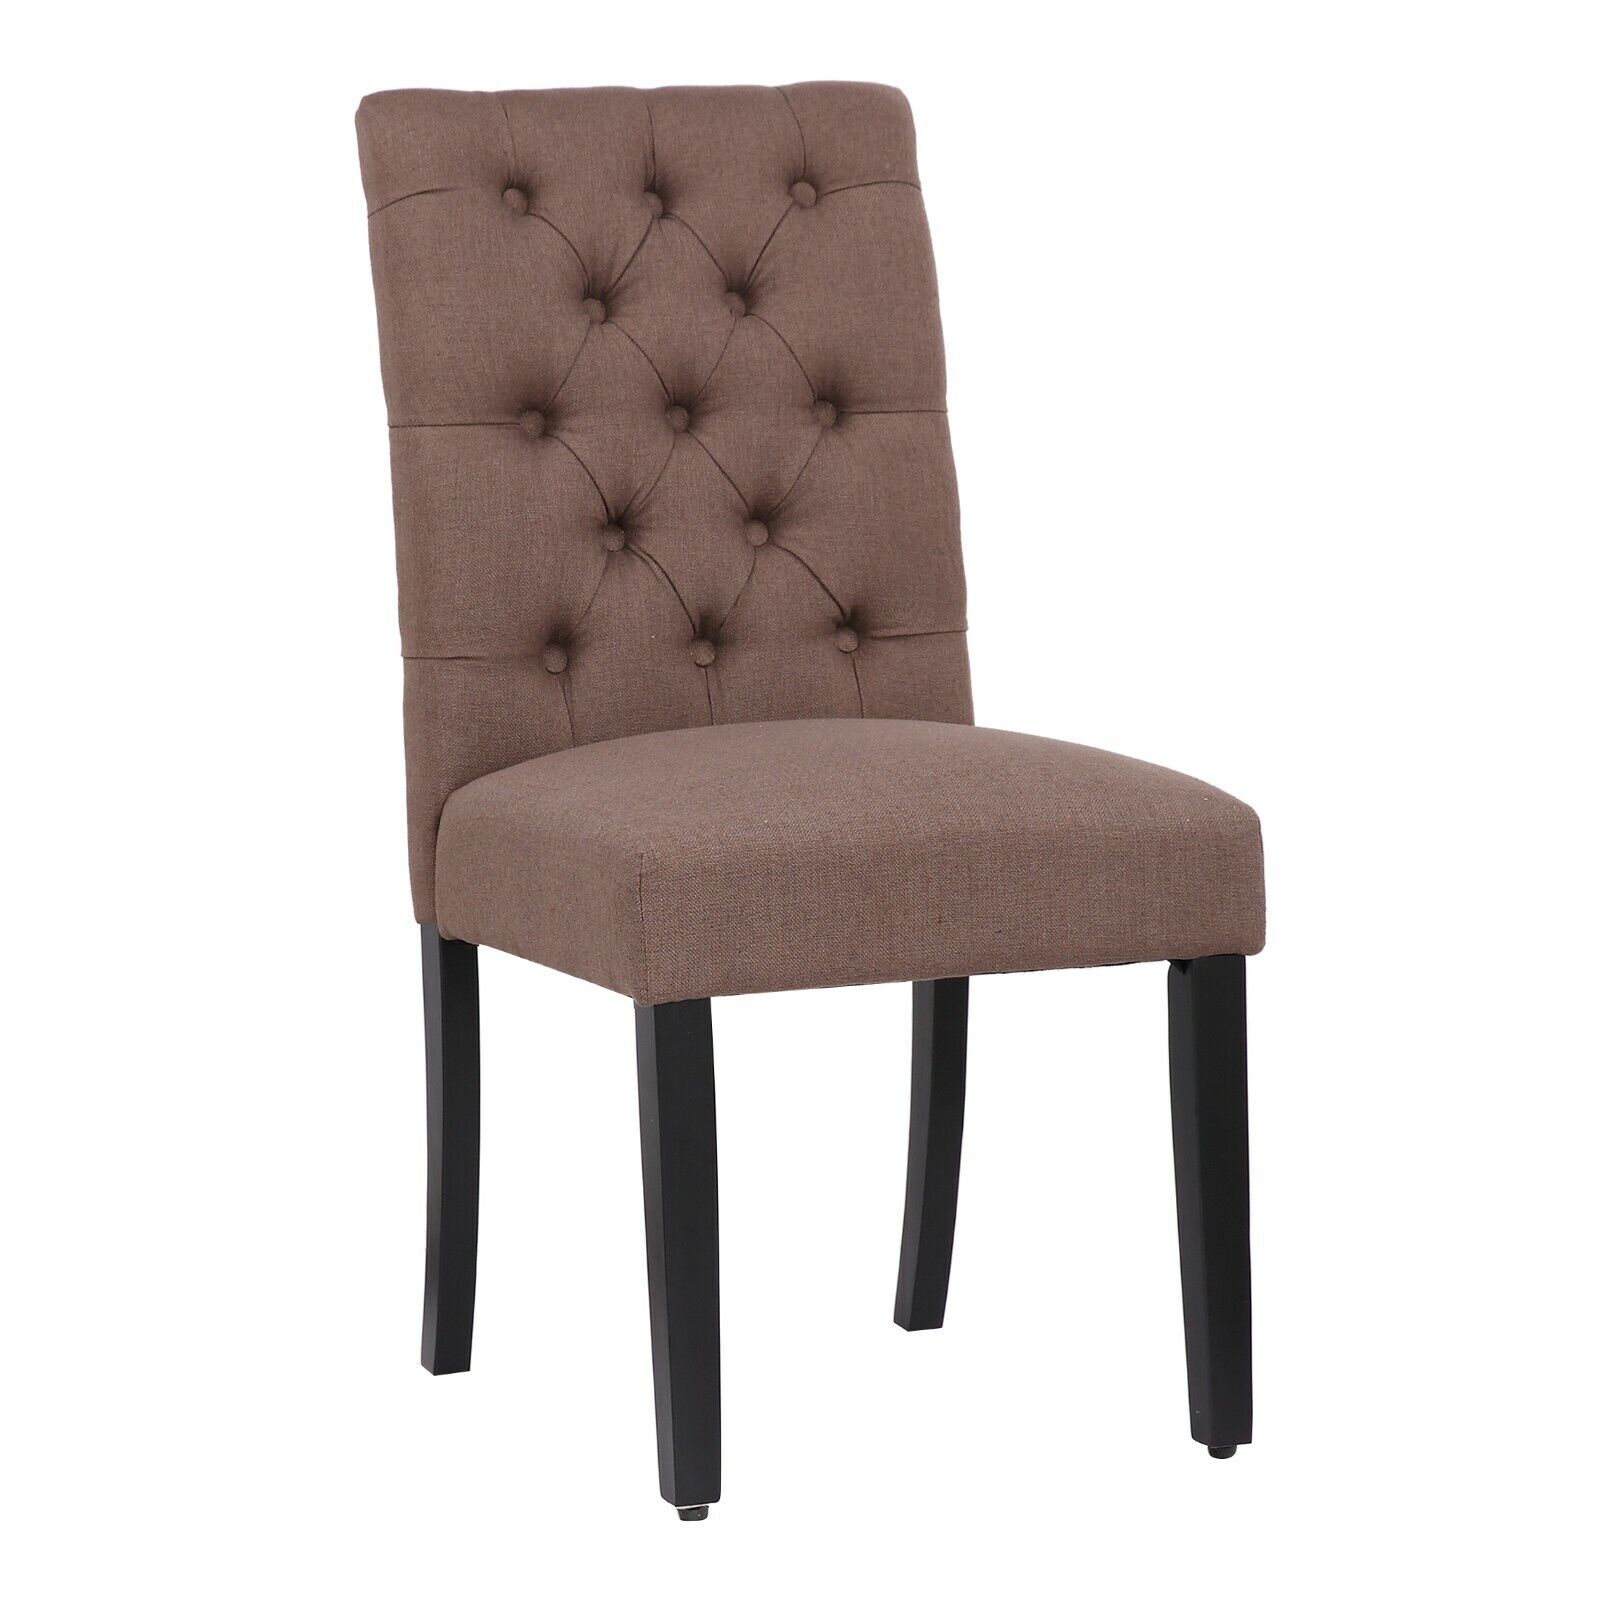 Tufted Button Padded Fabric Upholstered Barstool Dining Kitchen Seat Side Chair